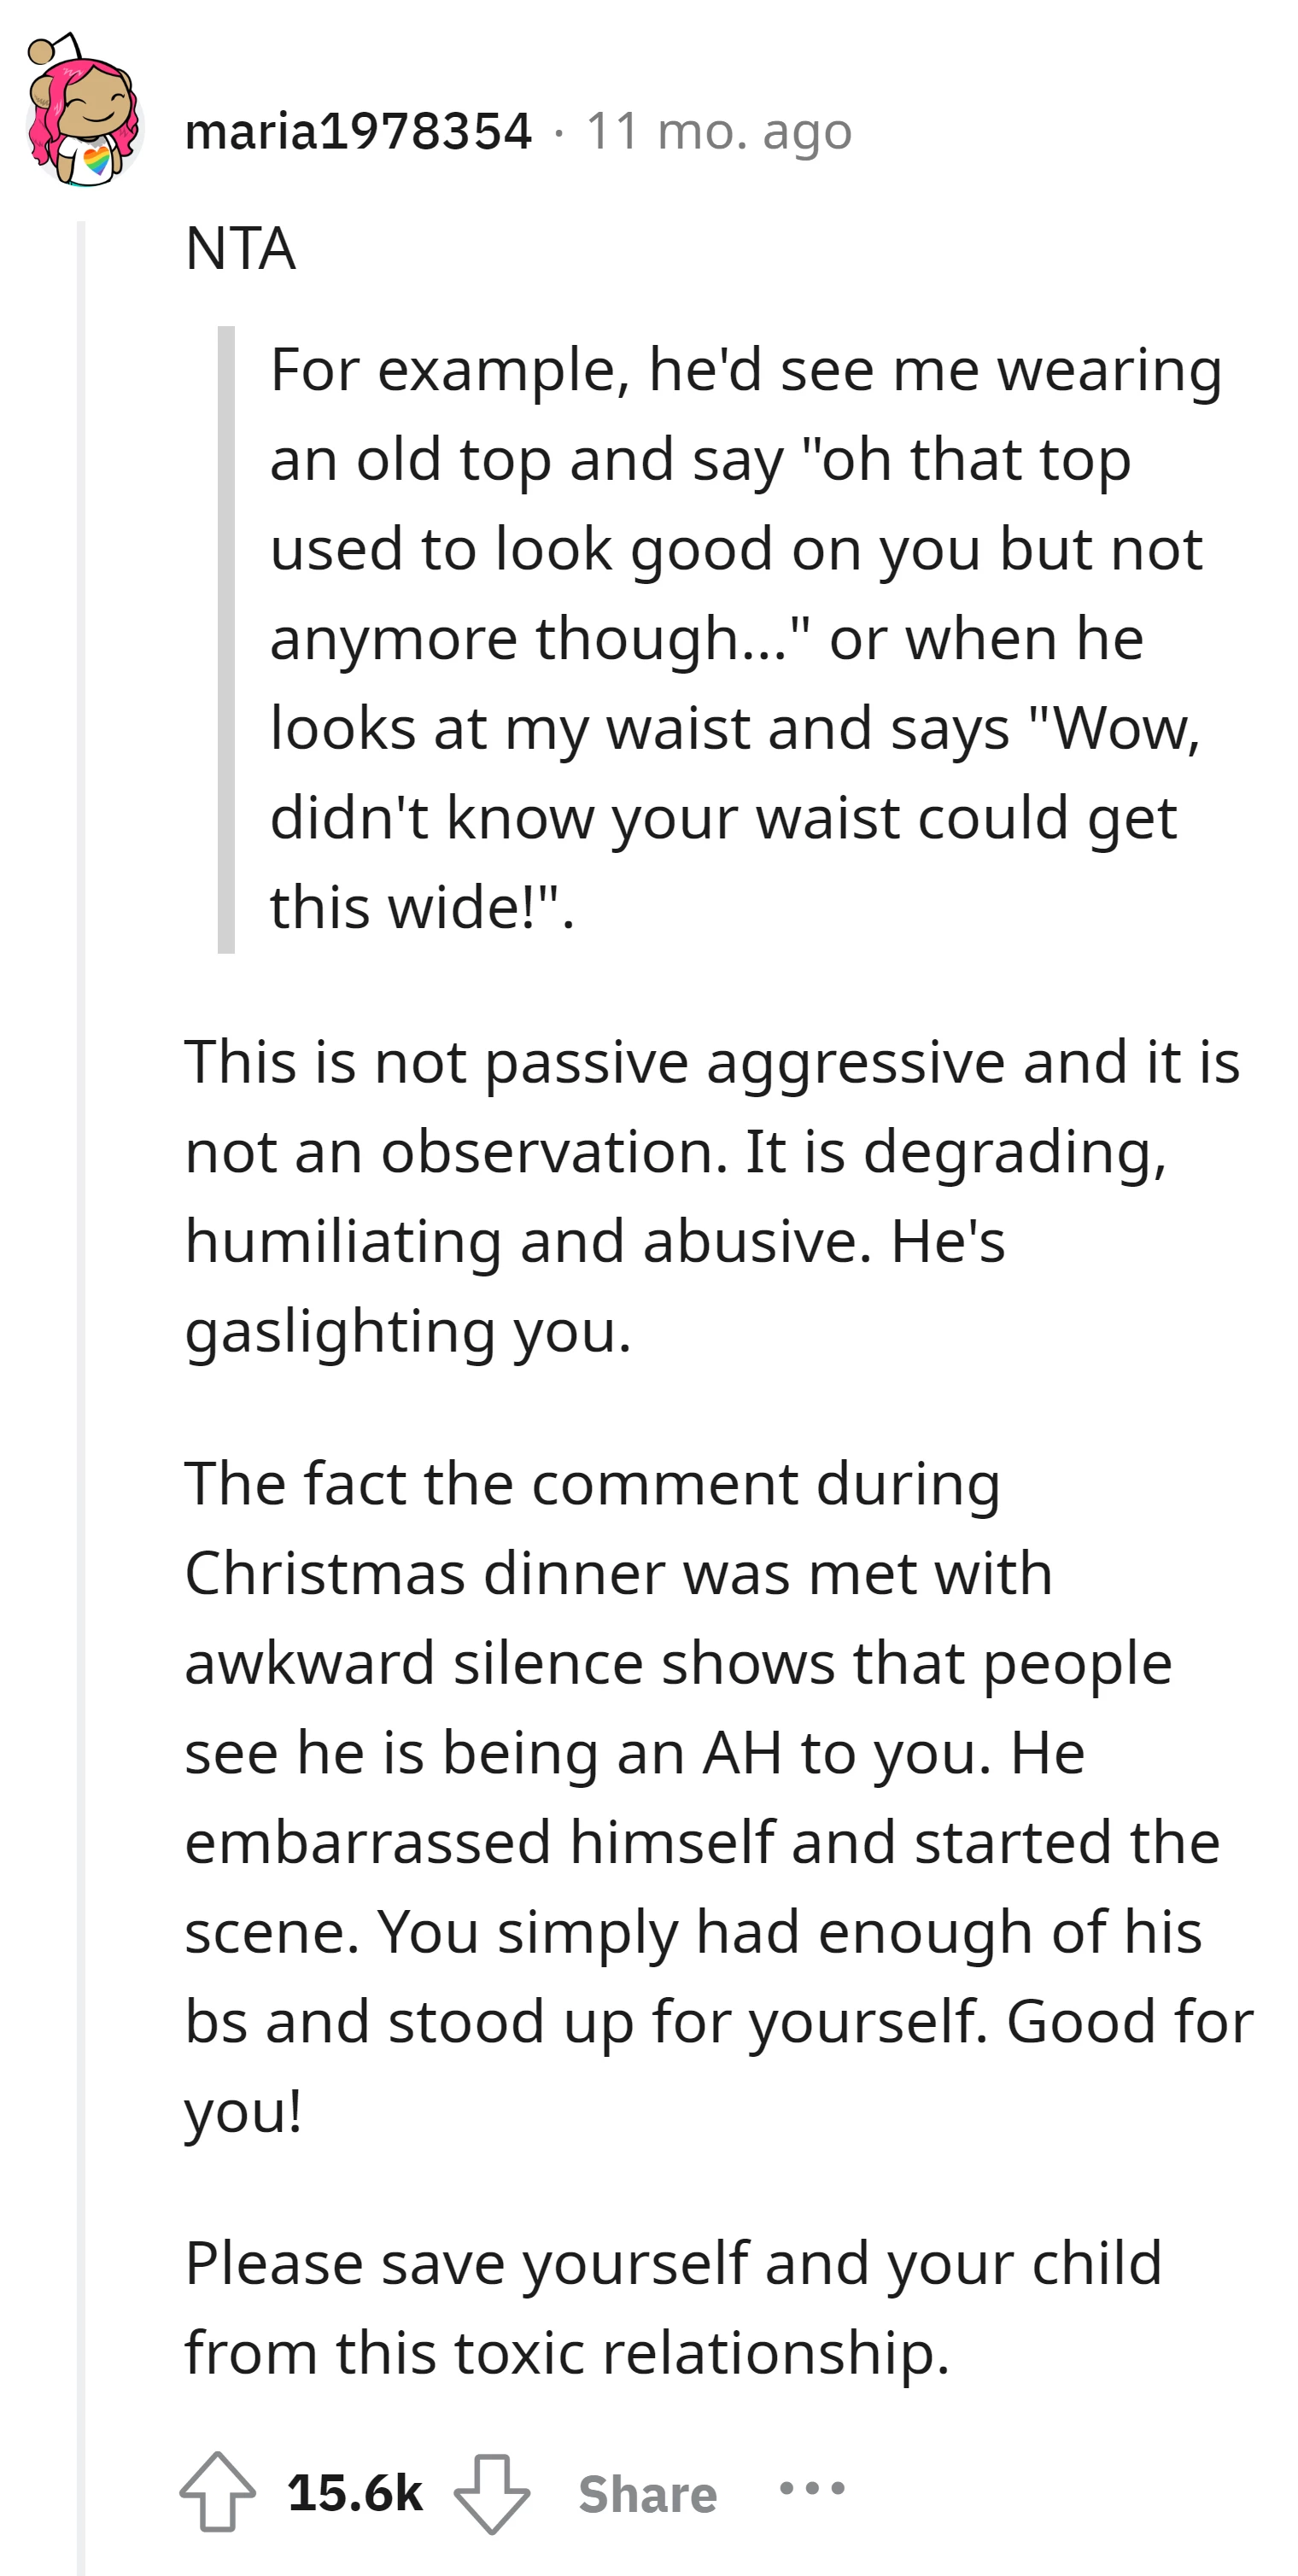 The commenter asserts that the husband's behavior is not passive-aggressive but rather degrading and abusive